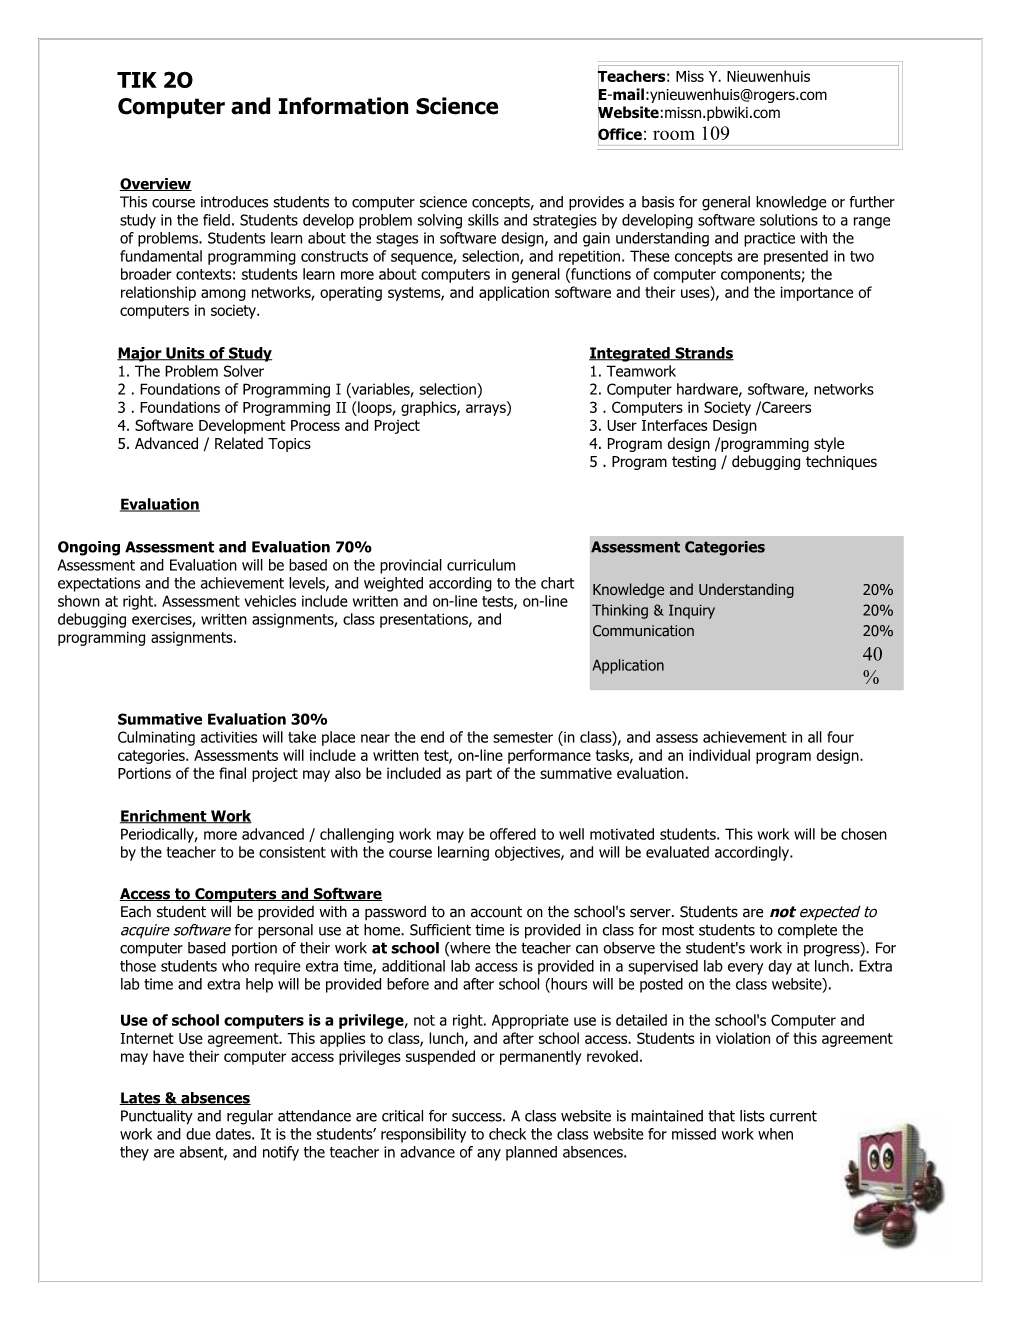 Overview This Course Introduces Students to Computer Science Concepts, and Provides a Basis